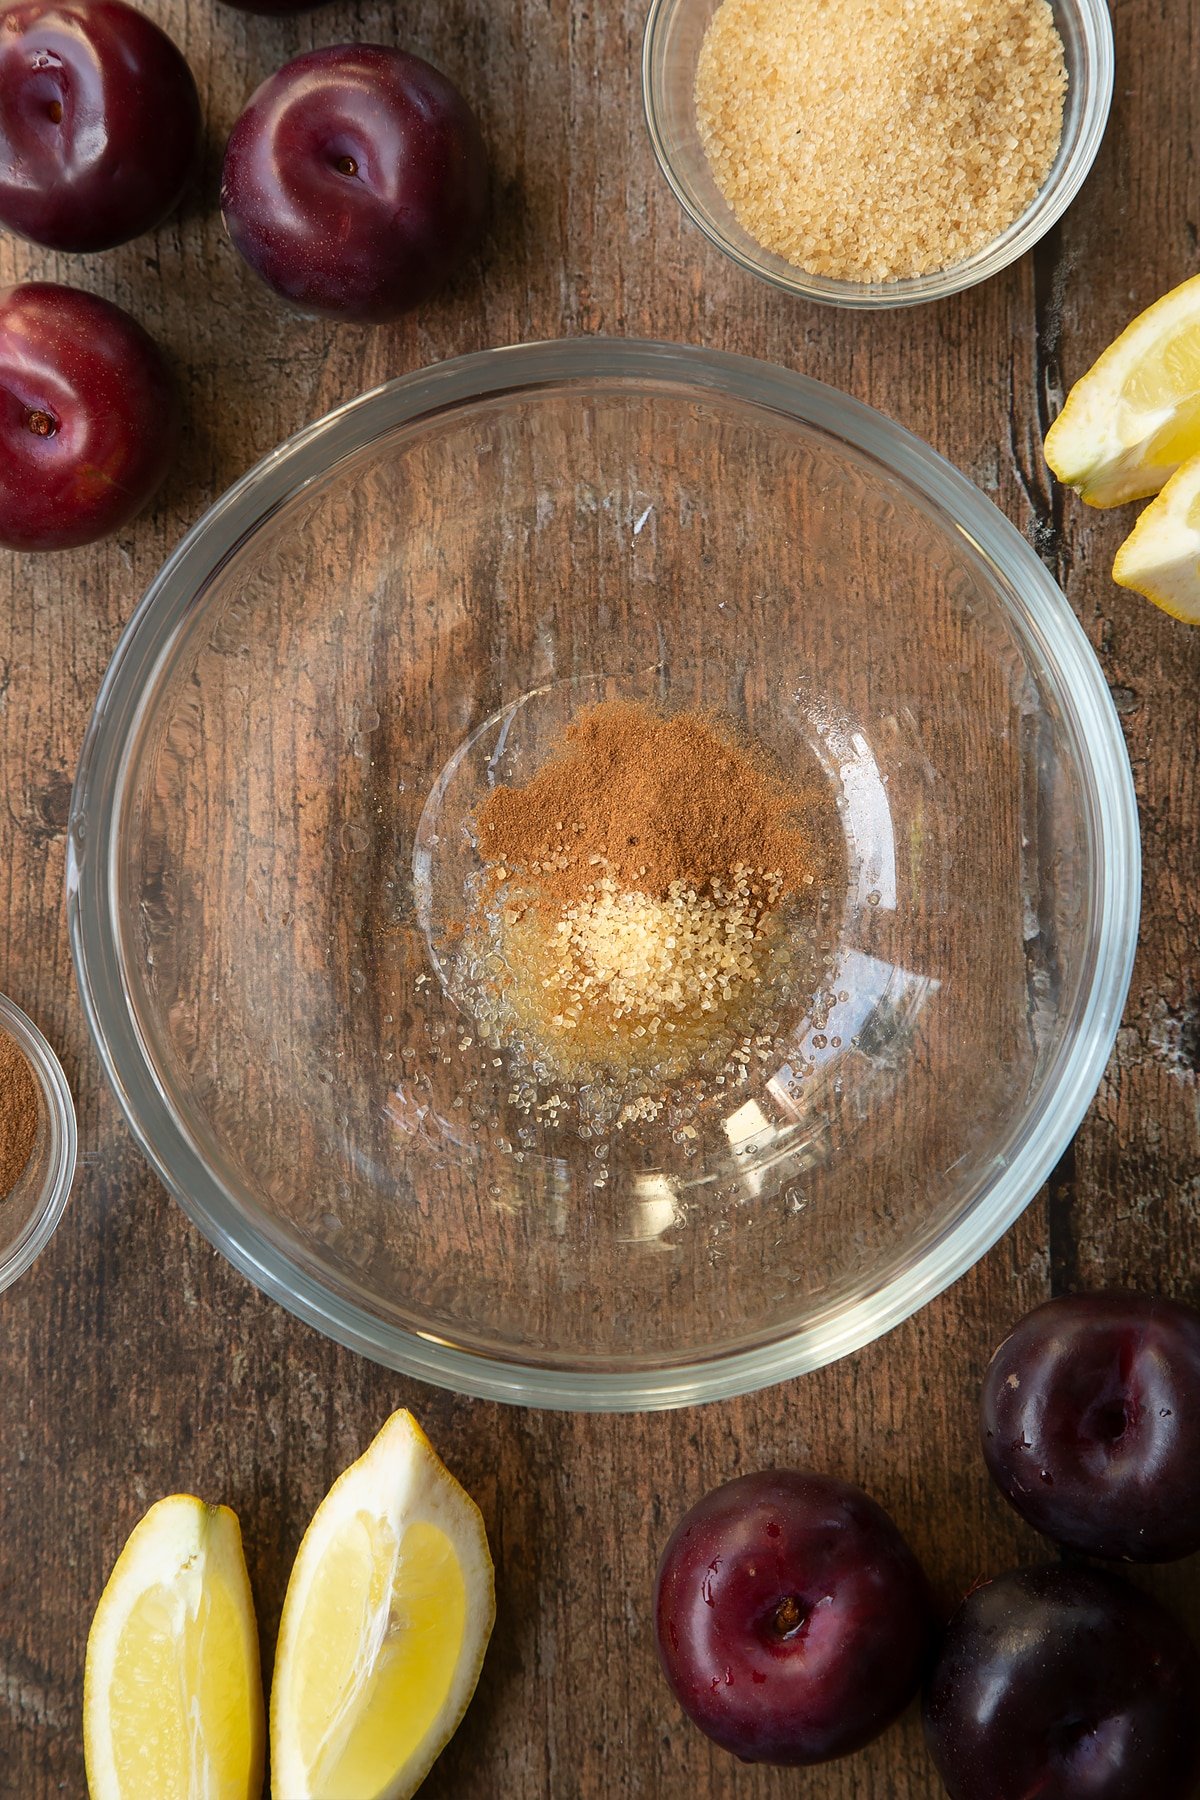 Sugar, lemon juice and cinnamon in a glass mixing bowl. Ingredients to make a plum pastry recipe surround the bowl.